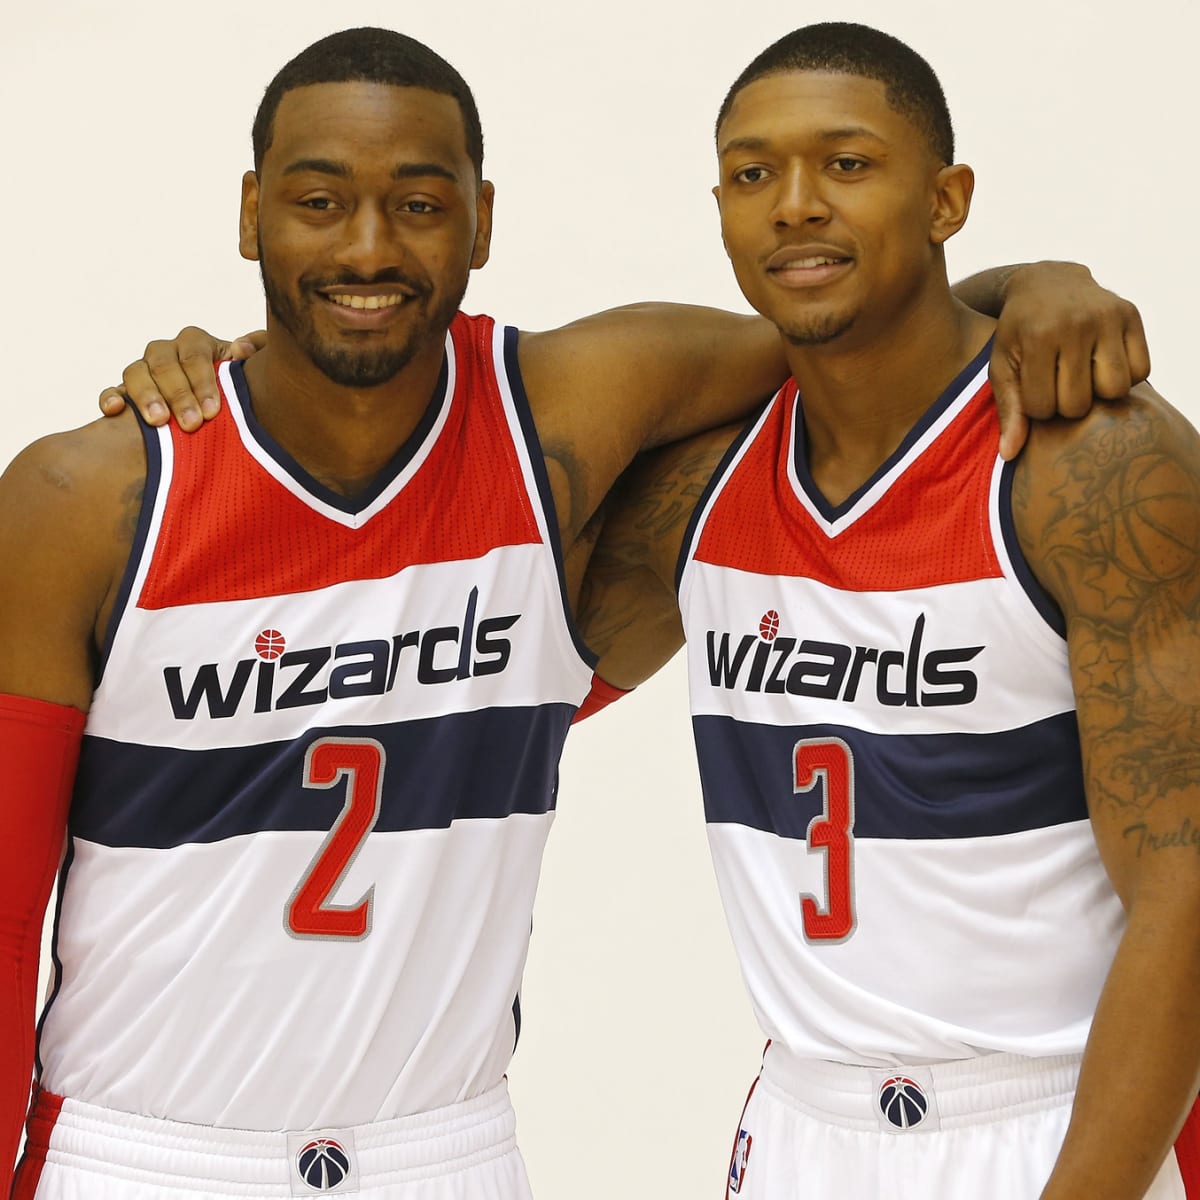 Beal outduels ex-teammate Wall, Wizards top Rockets 131-119 - The